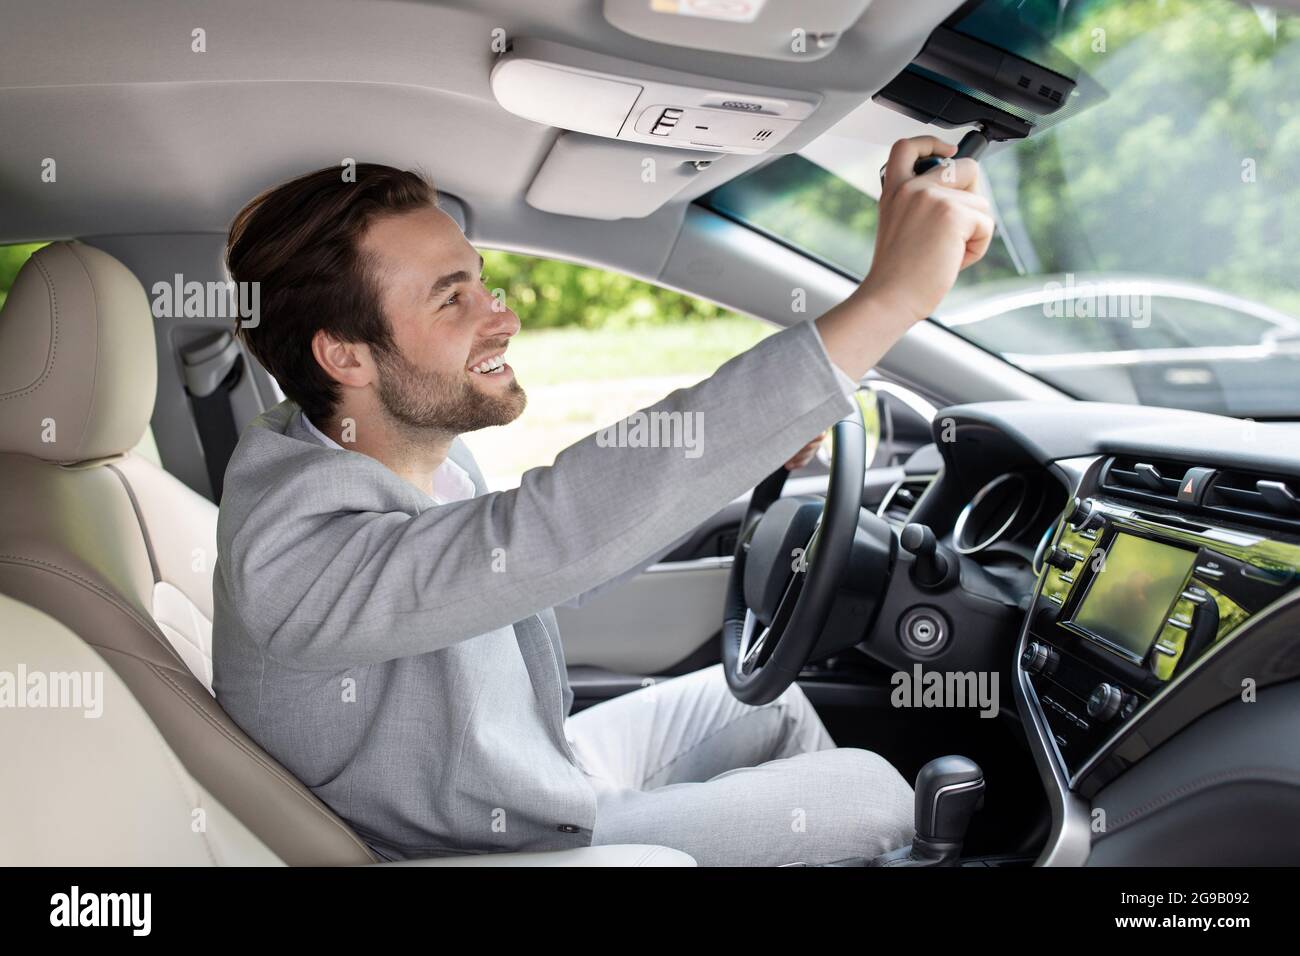 https://c8.alamy.com/comp/2G9B092/man-sitting-in-car-and-adjusting-rearview-mirror-car-interior-road-to-office-2G9B092.jpg